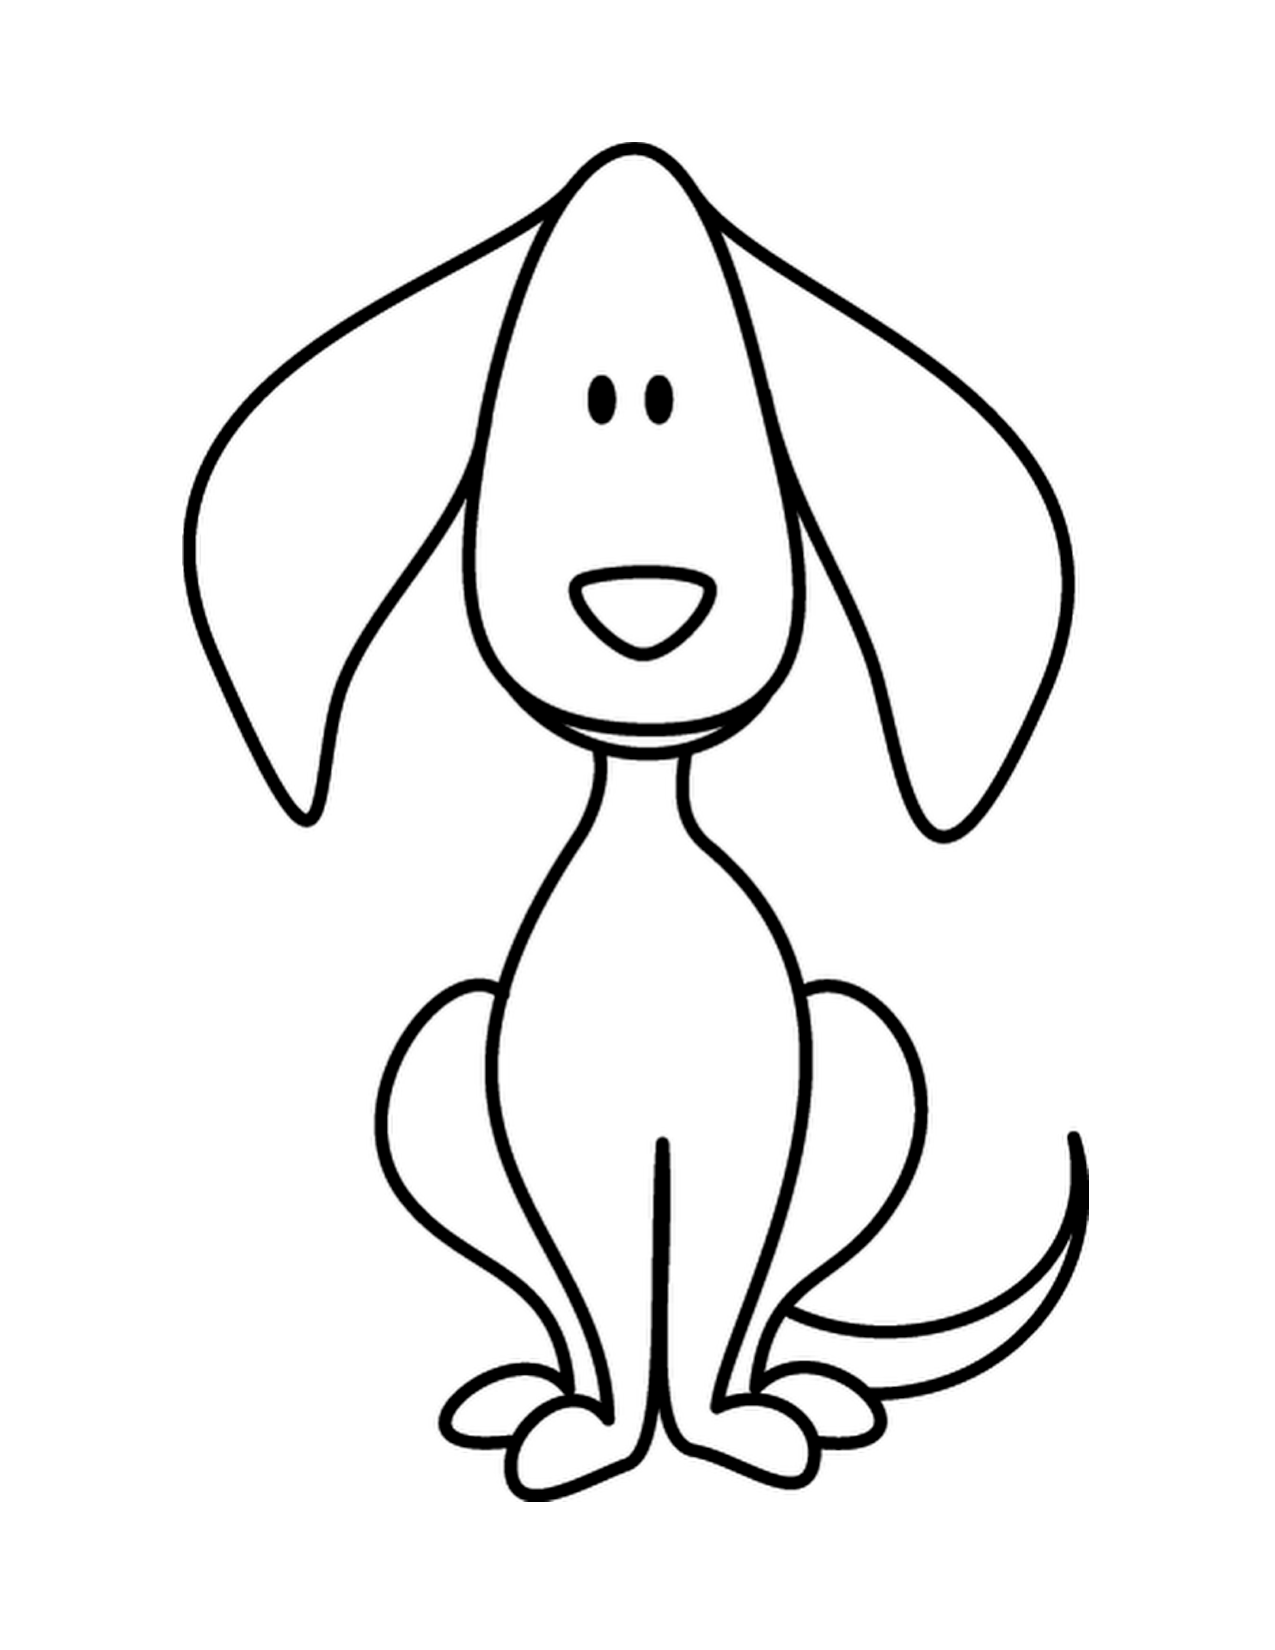 Simple Dog Drawing   Clipart Best